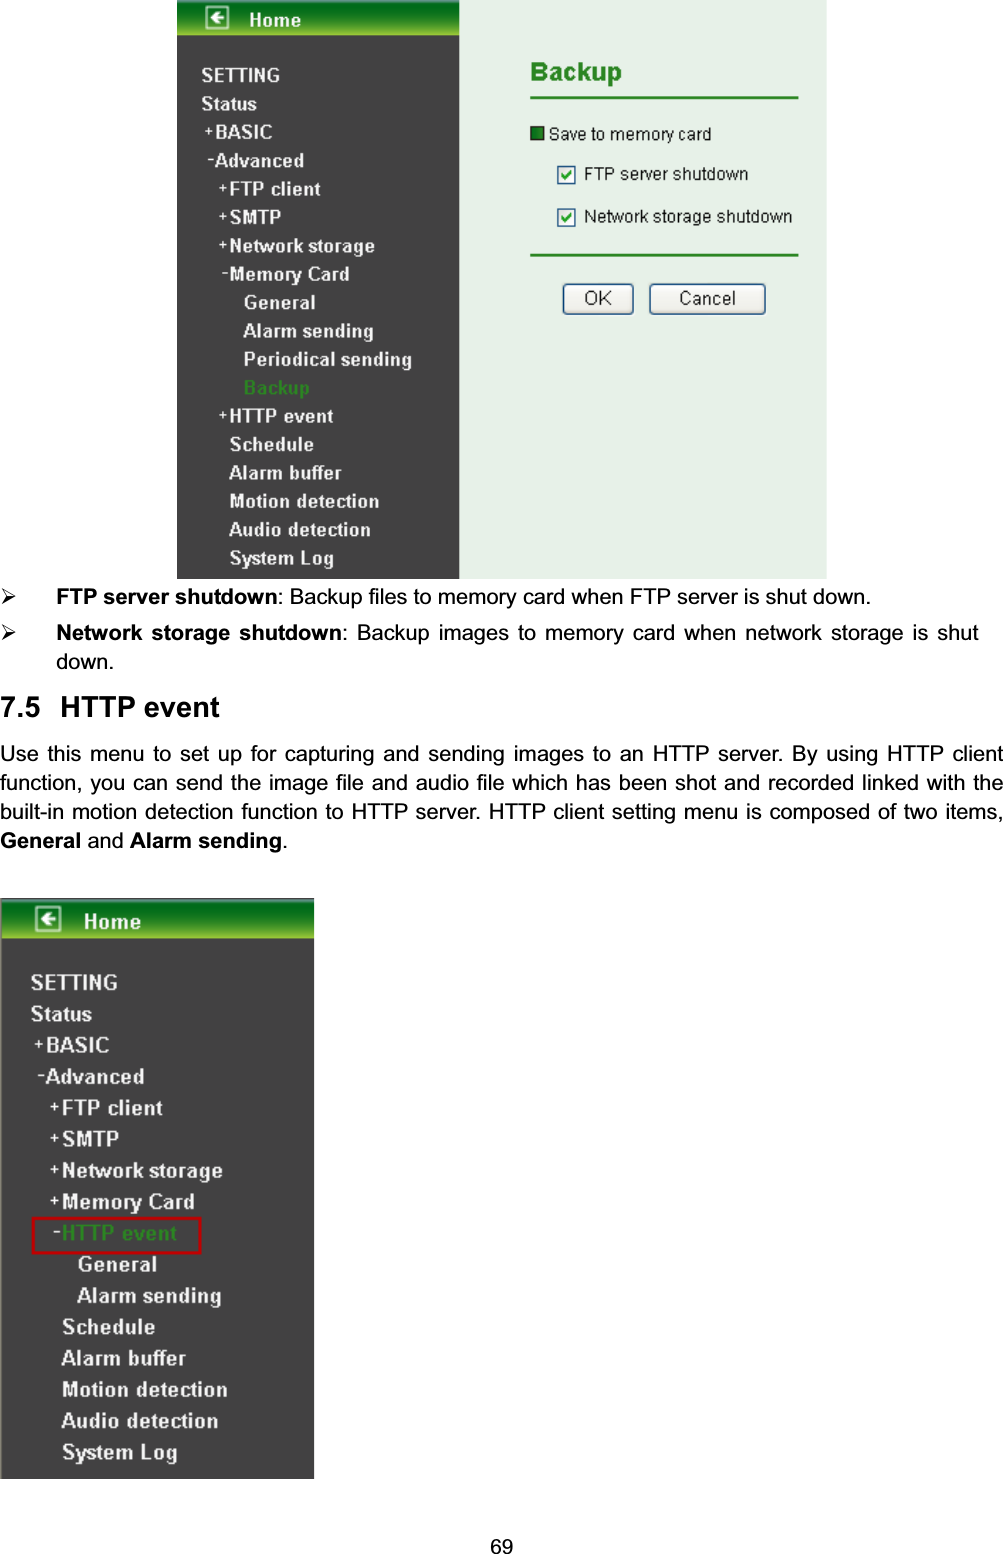   69 ¾ FTP server shutdown: Backup files to memory card when FTP server is shut down. ¾ Network storage shutdown: Backup images to memory card when network storage is shut down.  7.5 HTTP event Use this menu to set up for capturing and sending images to an HTTP server. By using HTTP client function, you can send the image file and audio file which has been shot and recorded linked with the built-in motion detection function to HTTP server. HTTP client setting menu is composed of two items, General and Alarm sending.    